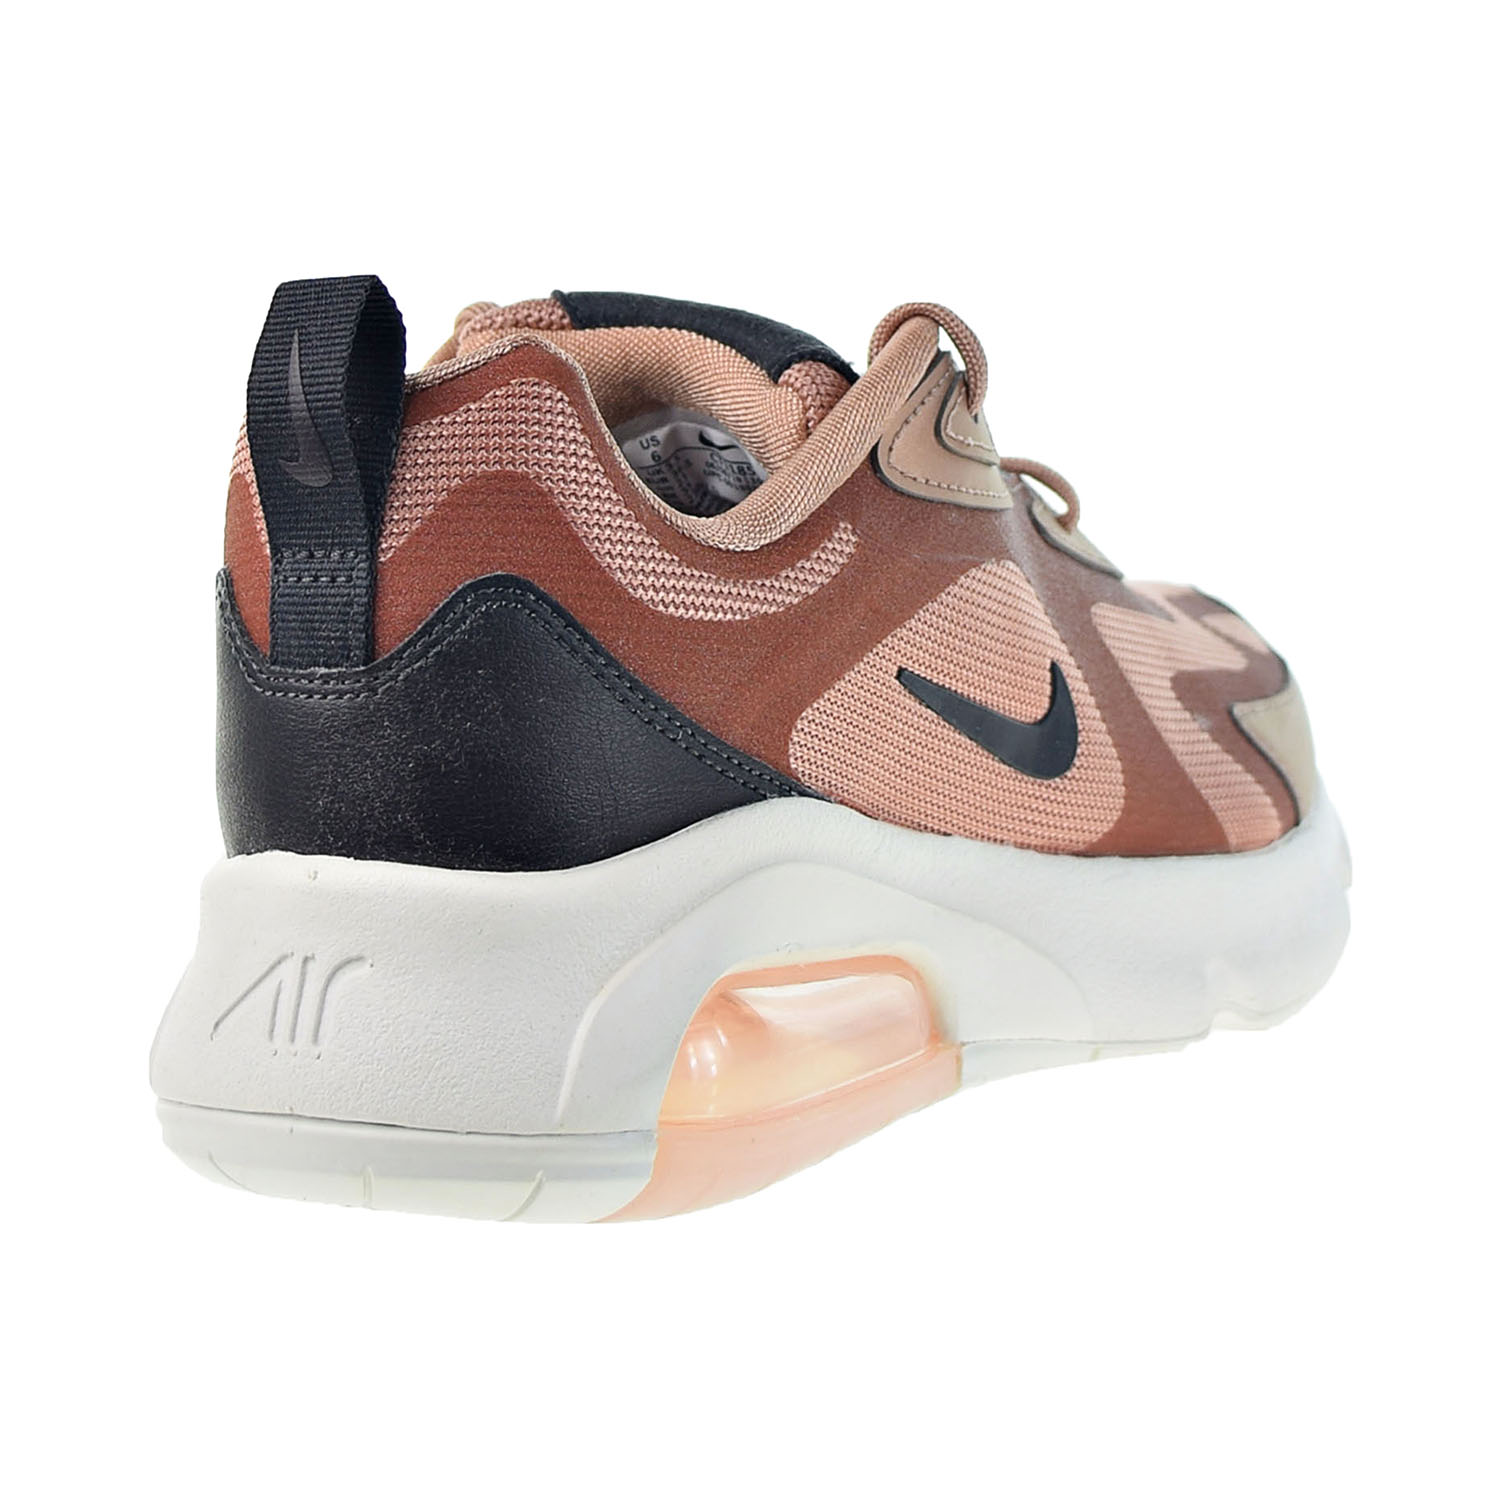 Nike Air Max 200 "Holiday Sparkle" Women's Shoes Metallic Red-Bronze ct1185-900 - image 3 of 6